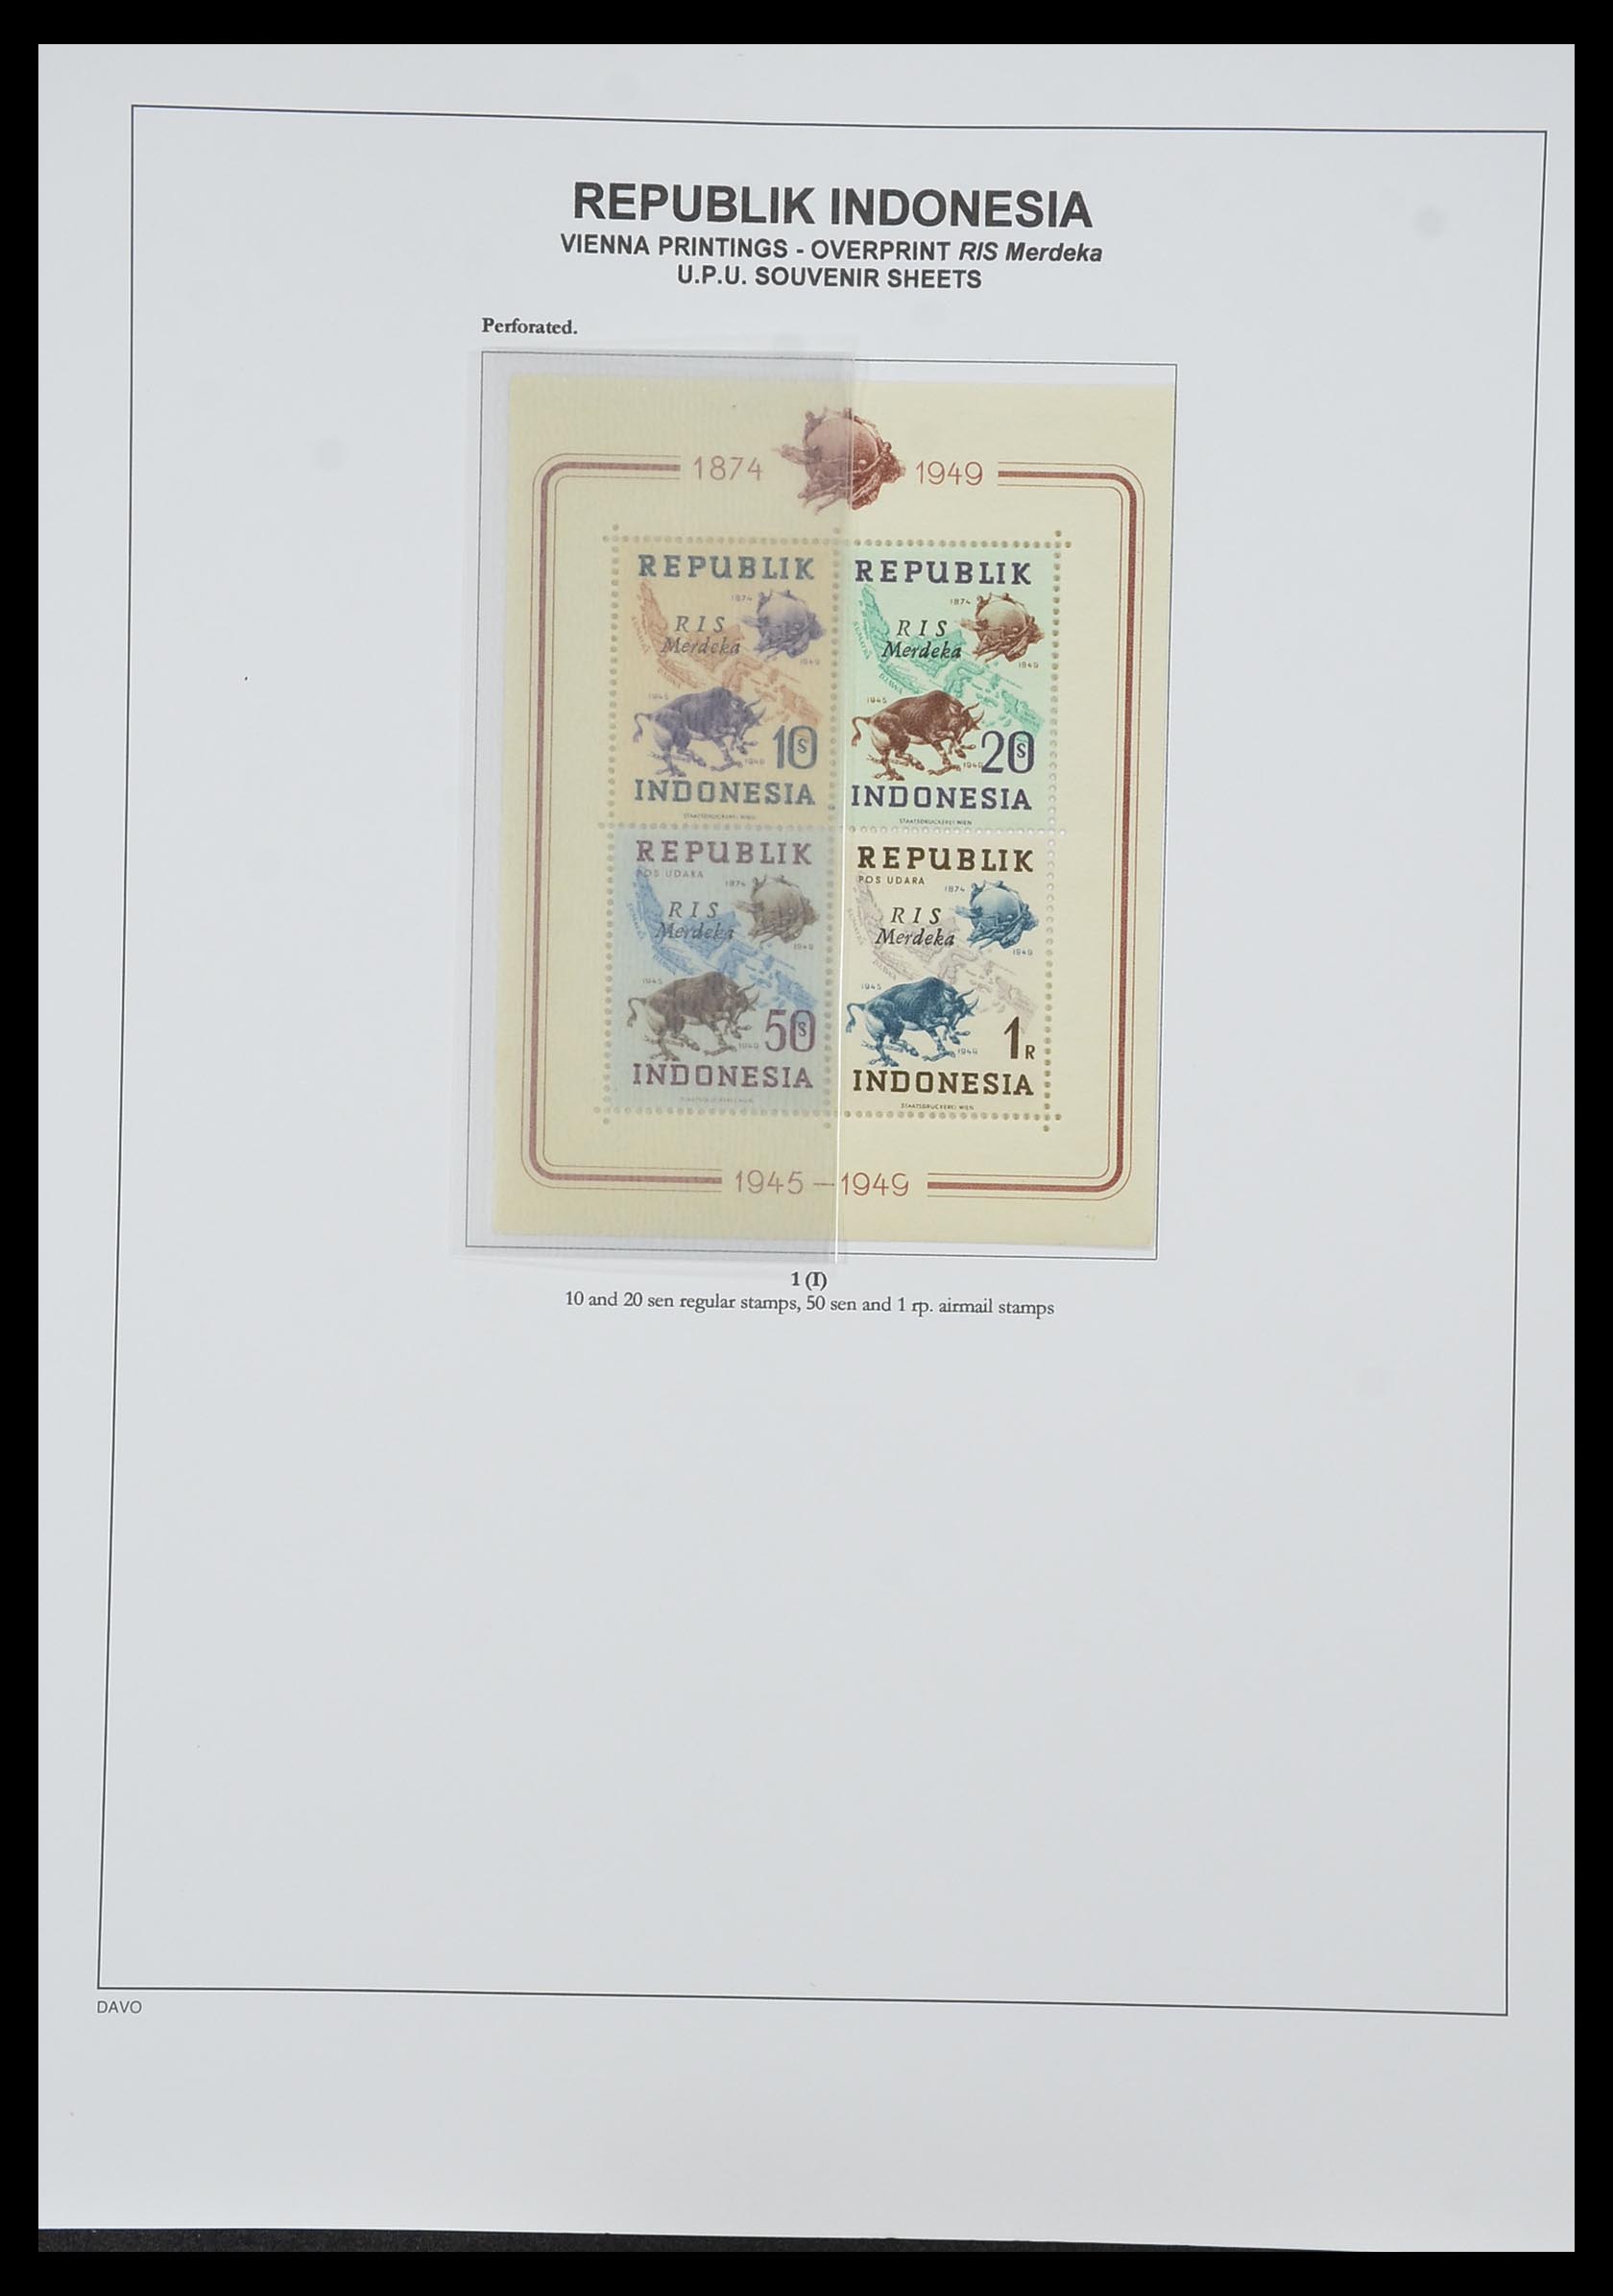 33988 052 - Stamp collection 33988 Vienna printings Indonesia.